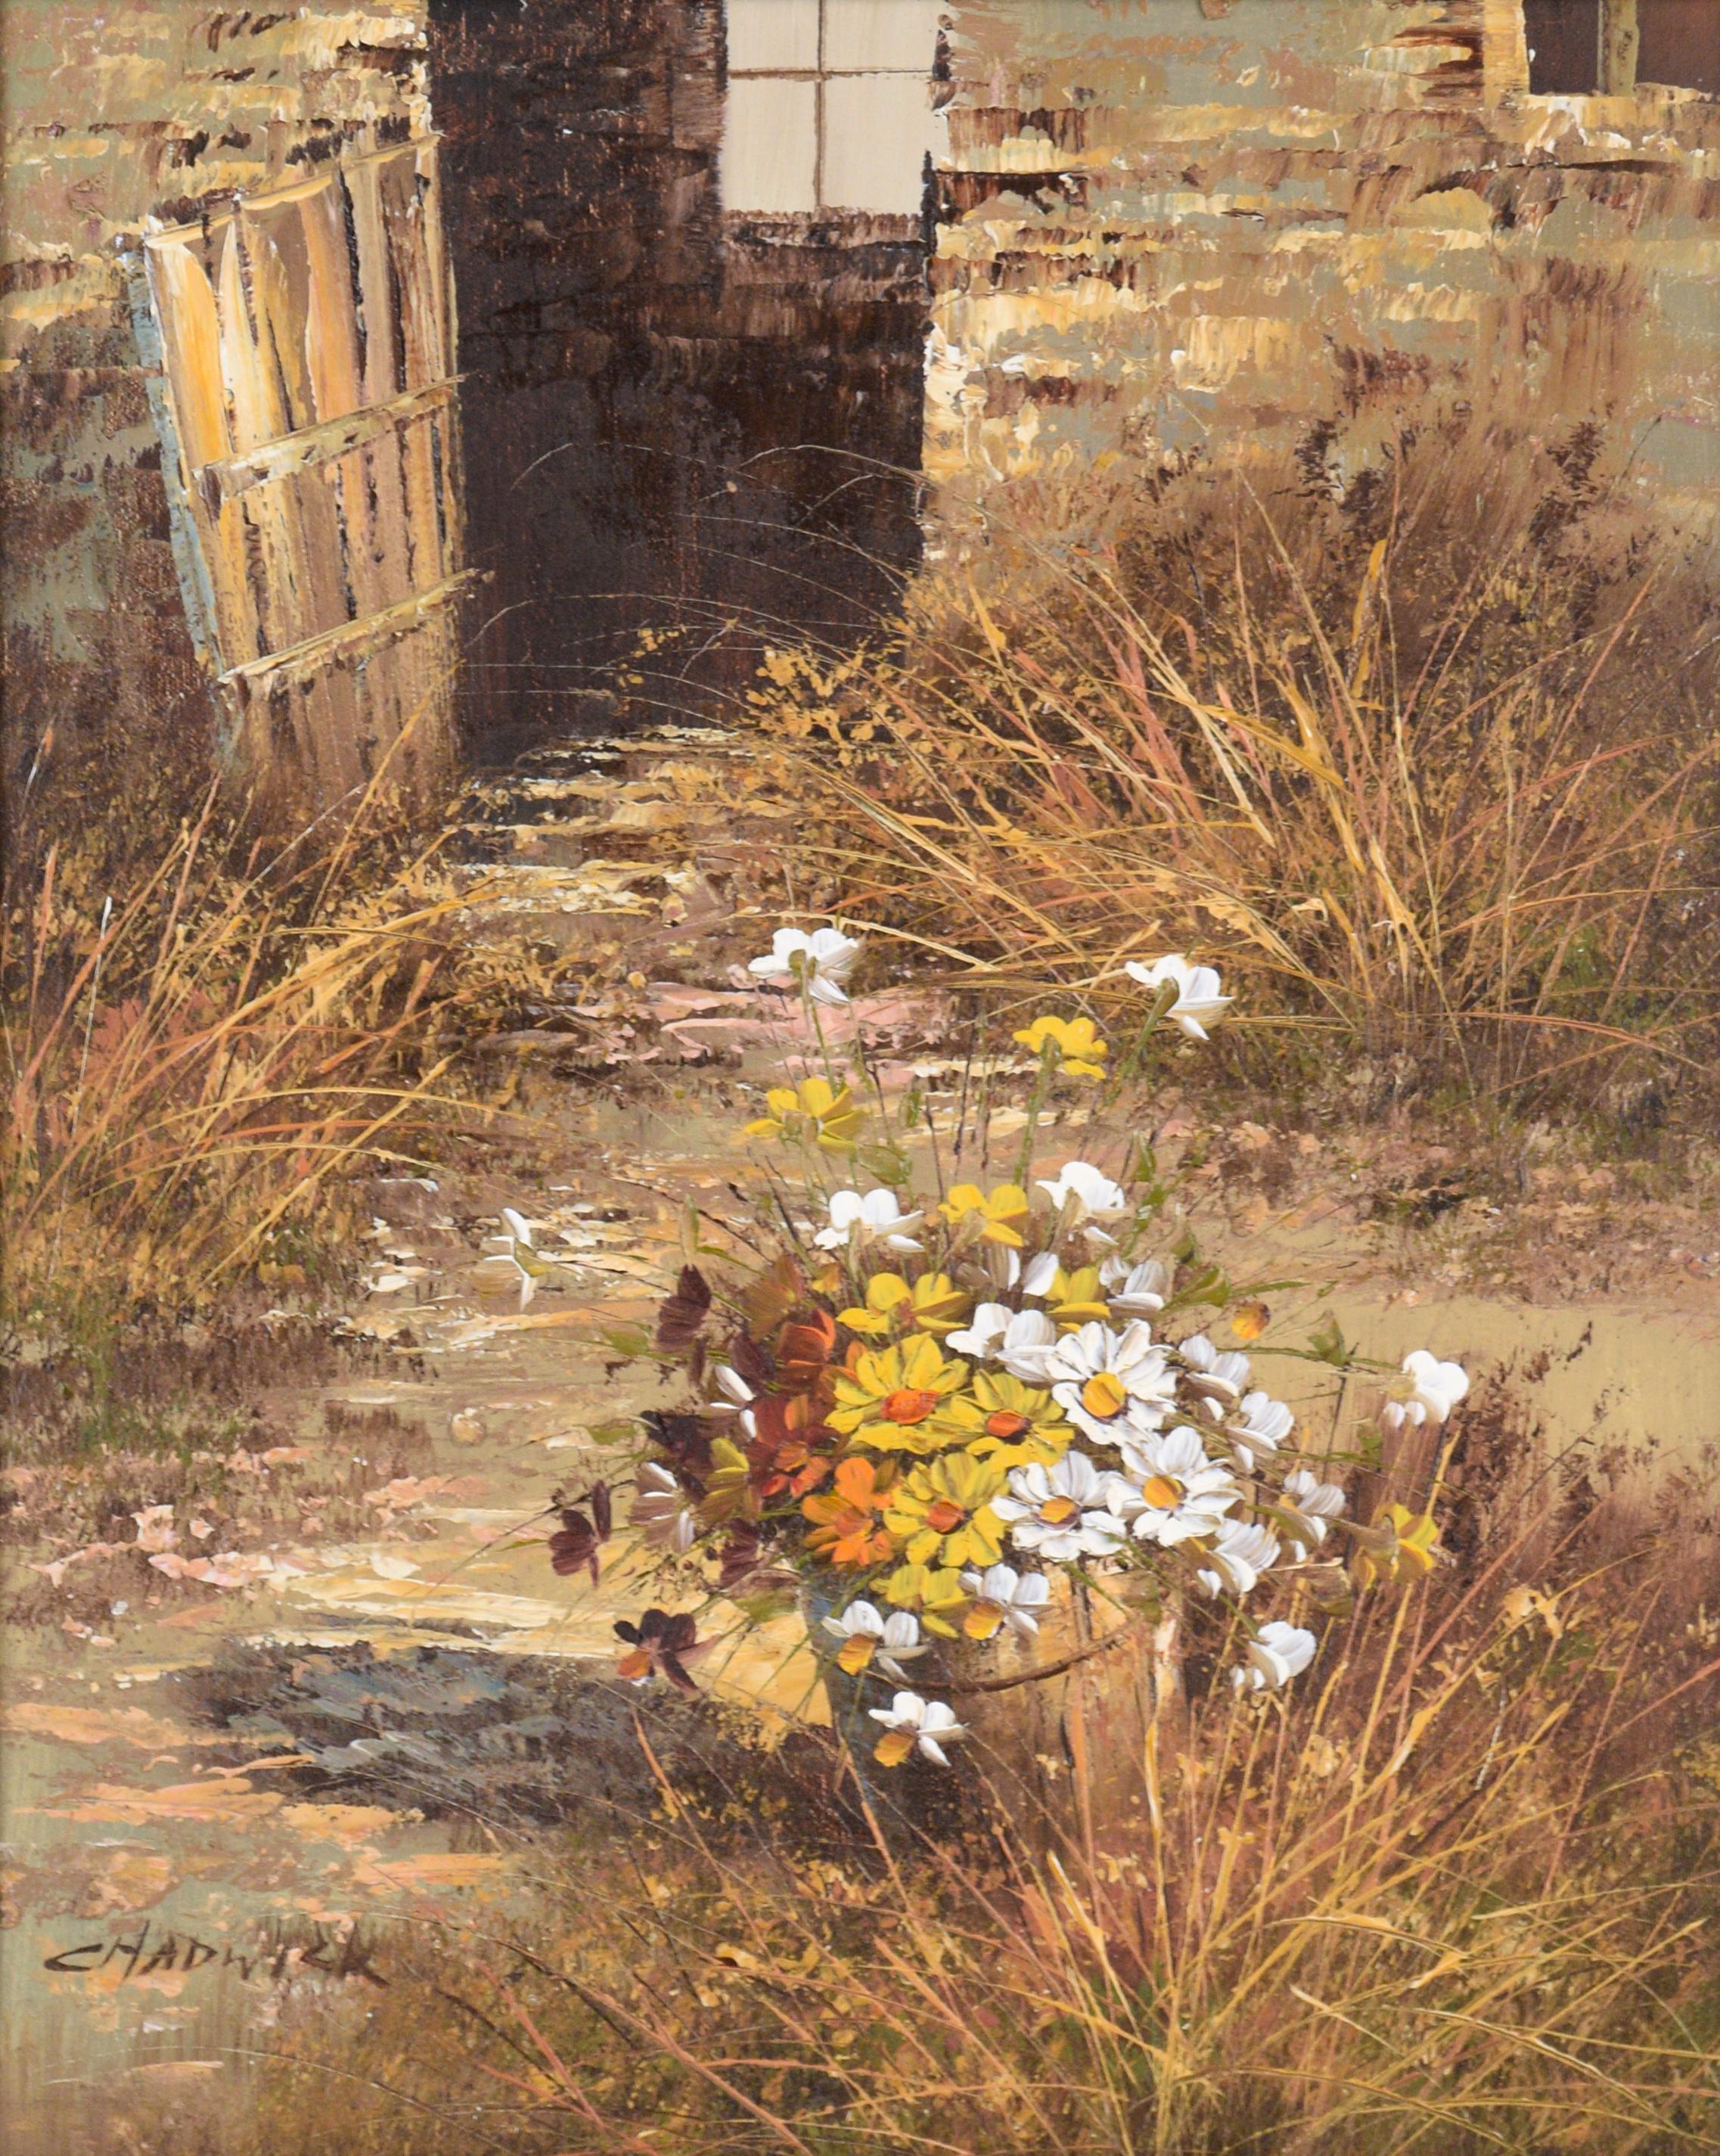 Daisies by the Back Door - Farm Landscape with Flowers in Oil on Canvas - Painting by Unknown